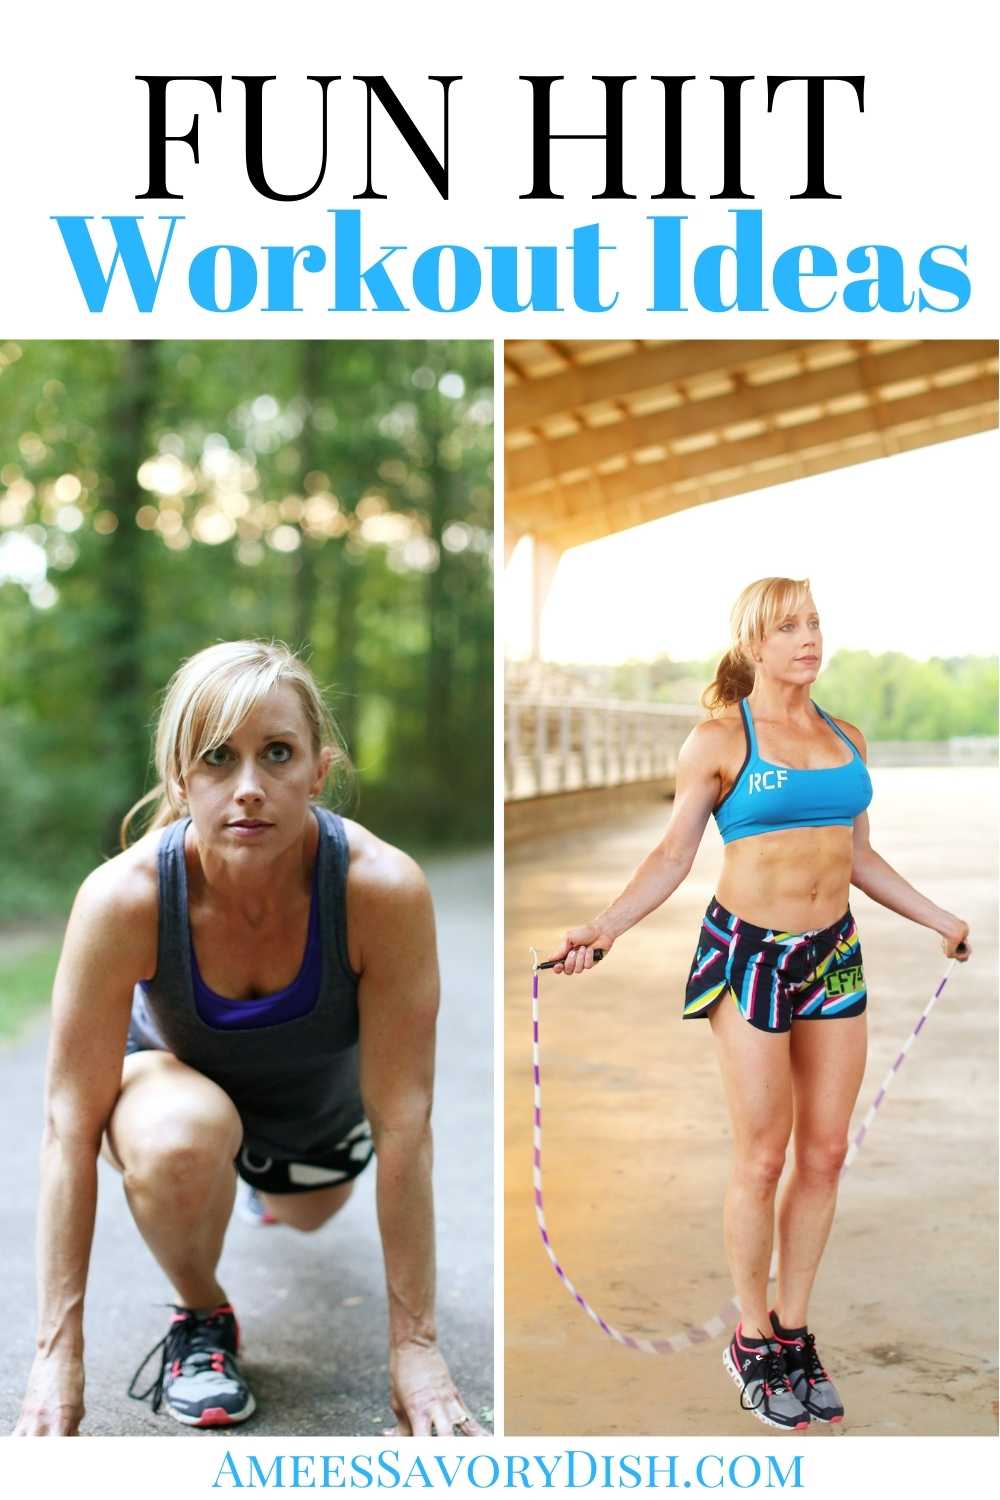 HIIT workout ideas using weights or just a jump rope and your bodyweight.  These workouts are guaranteed to get your heart pumping! #HIIT #HIITworkouts #Intervaltraining #workoutideas via @Ameessavorydish